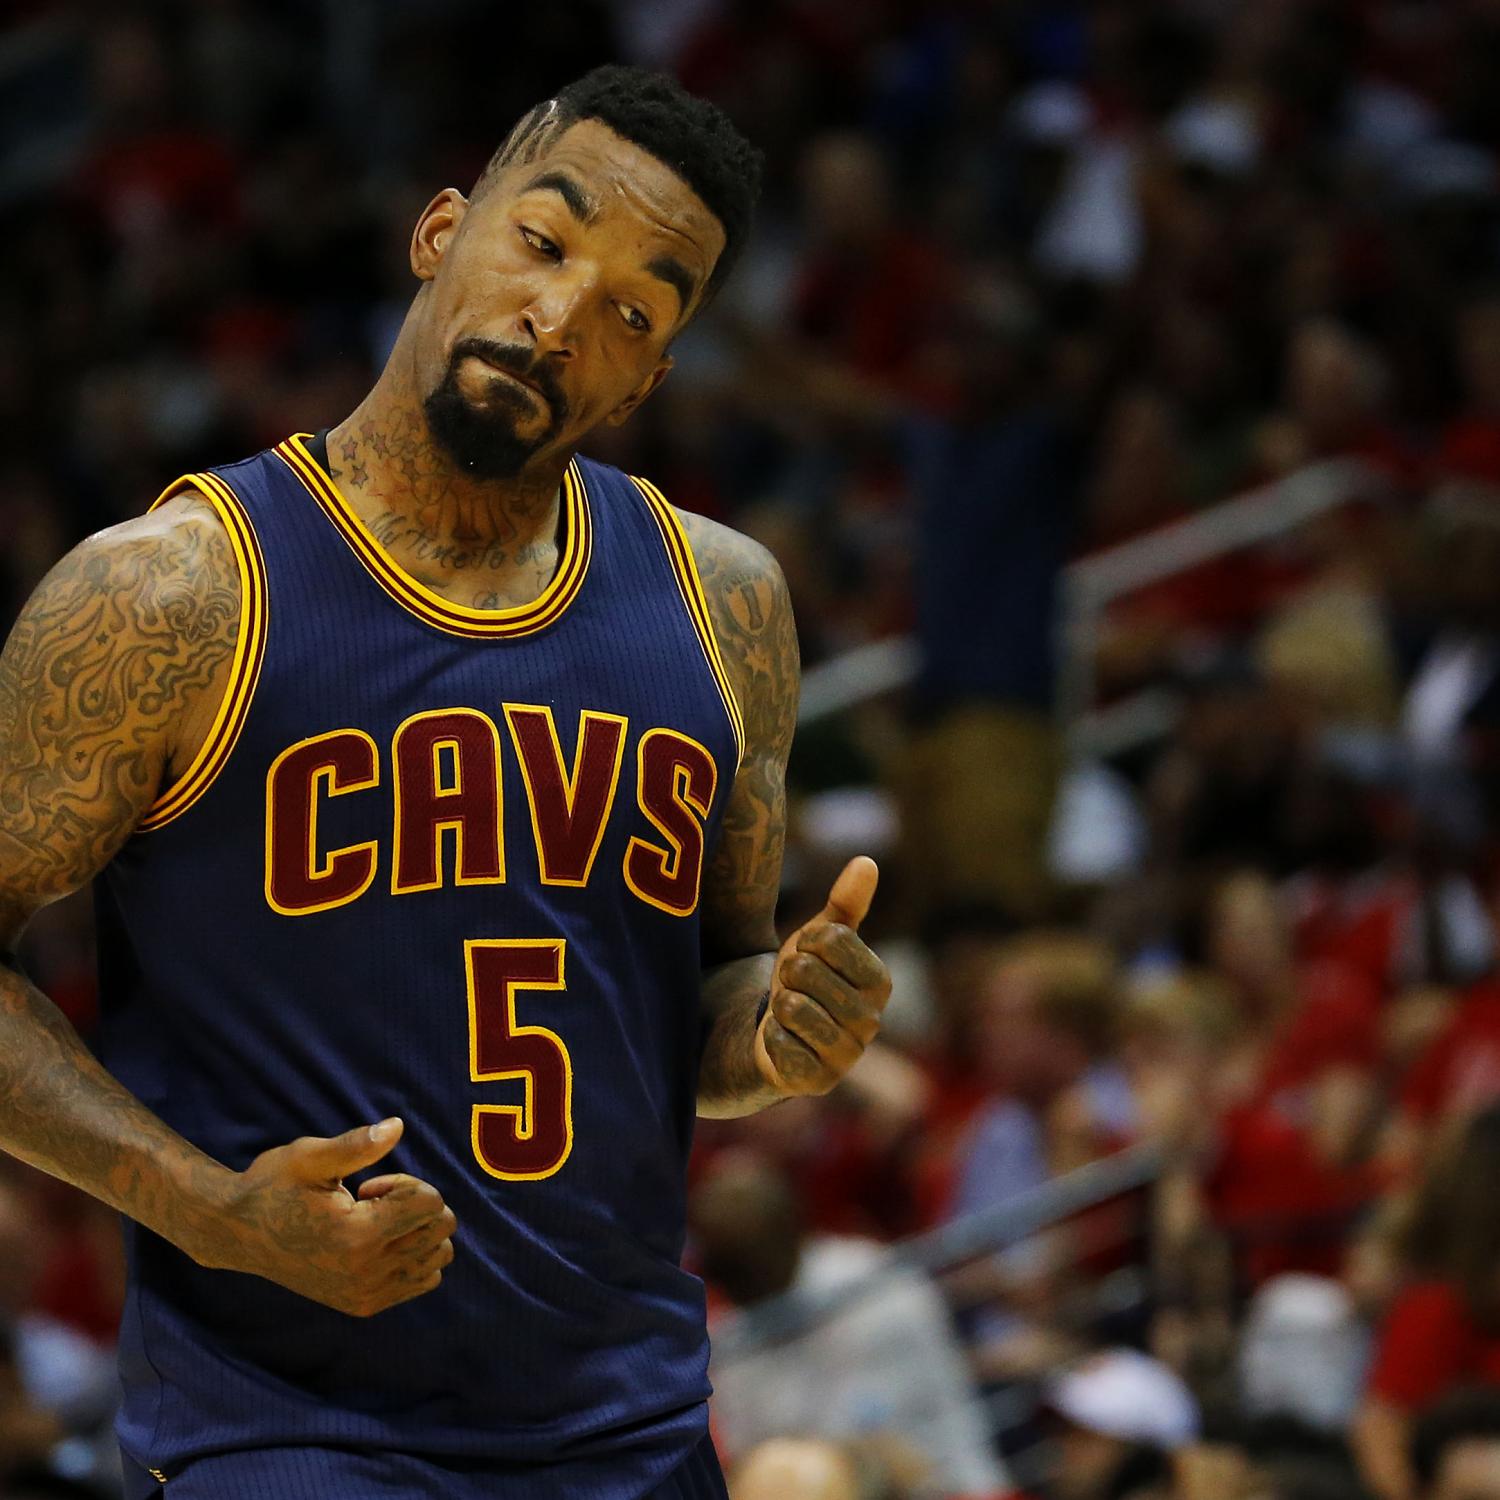 J.R. Smith has surgery, timetable for return now 12-14 weeks